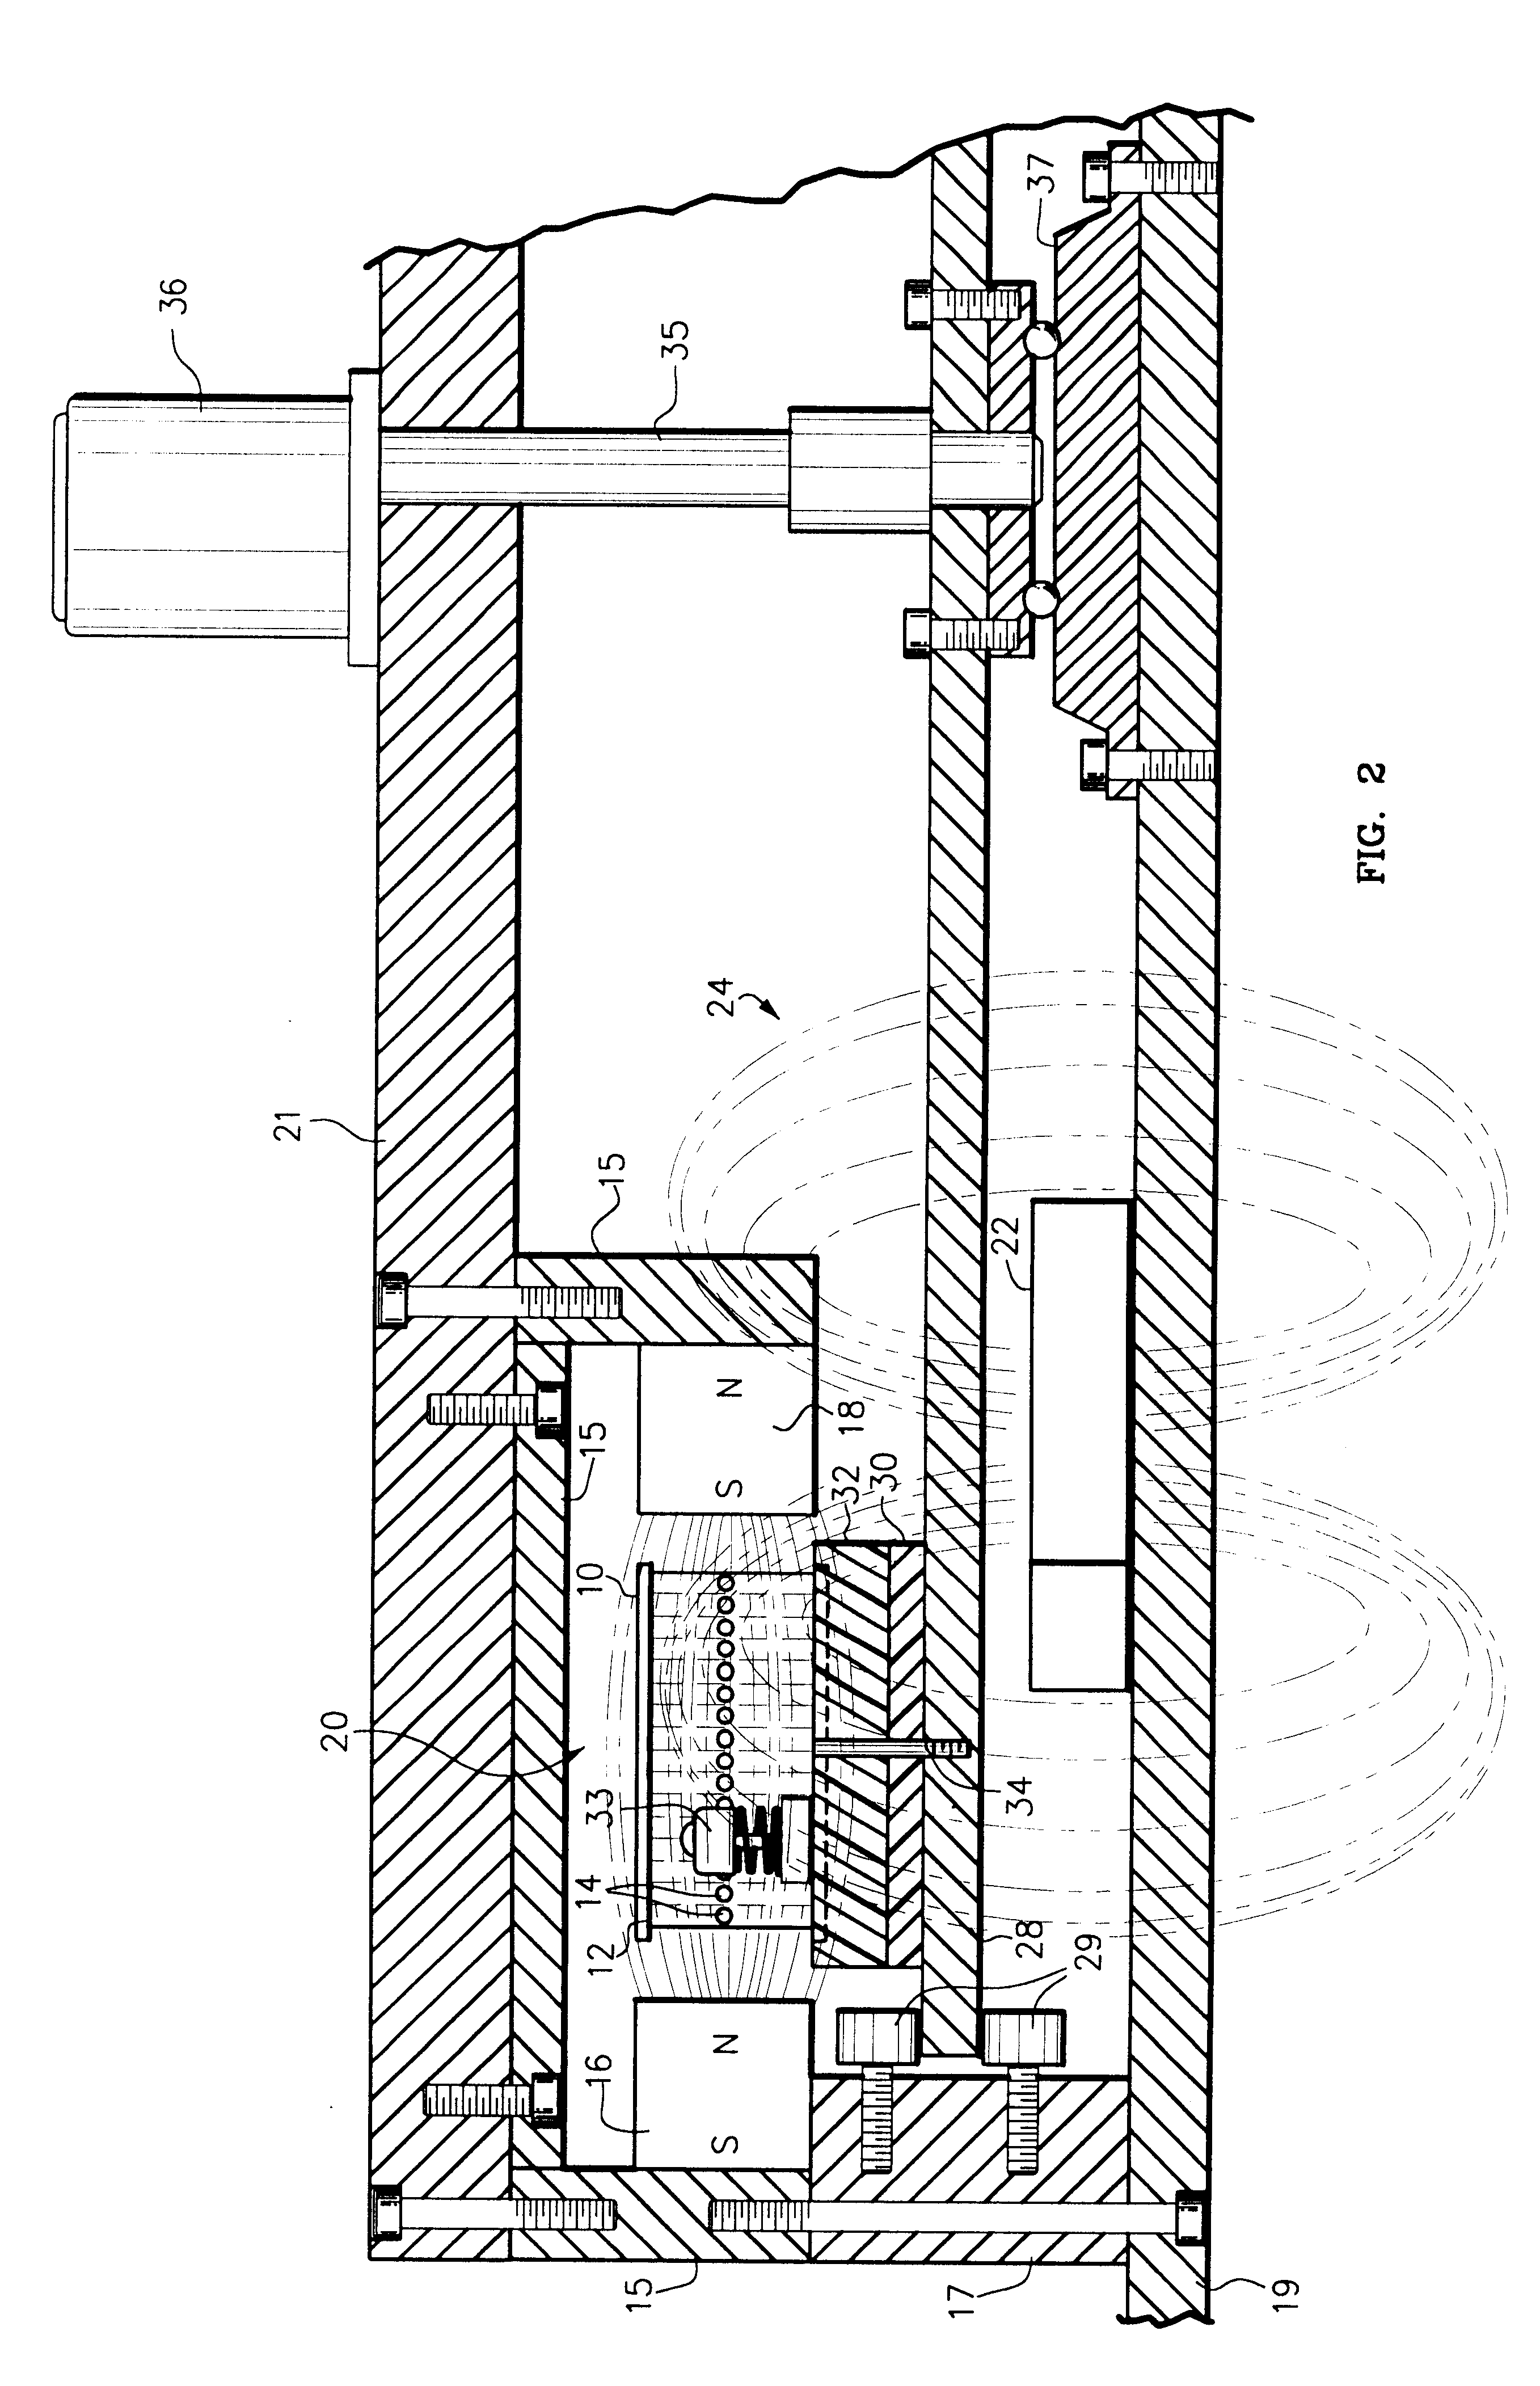 Magnetic levitation stirring devices and machines for mixing in vessels